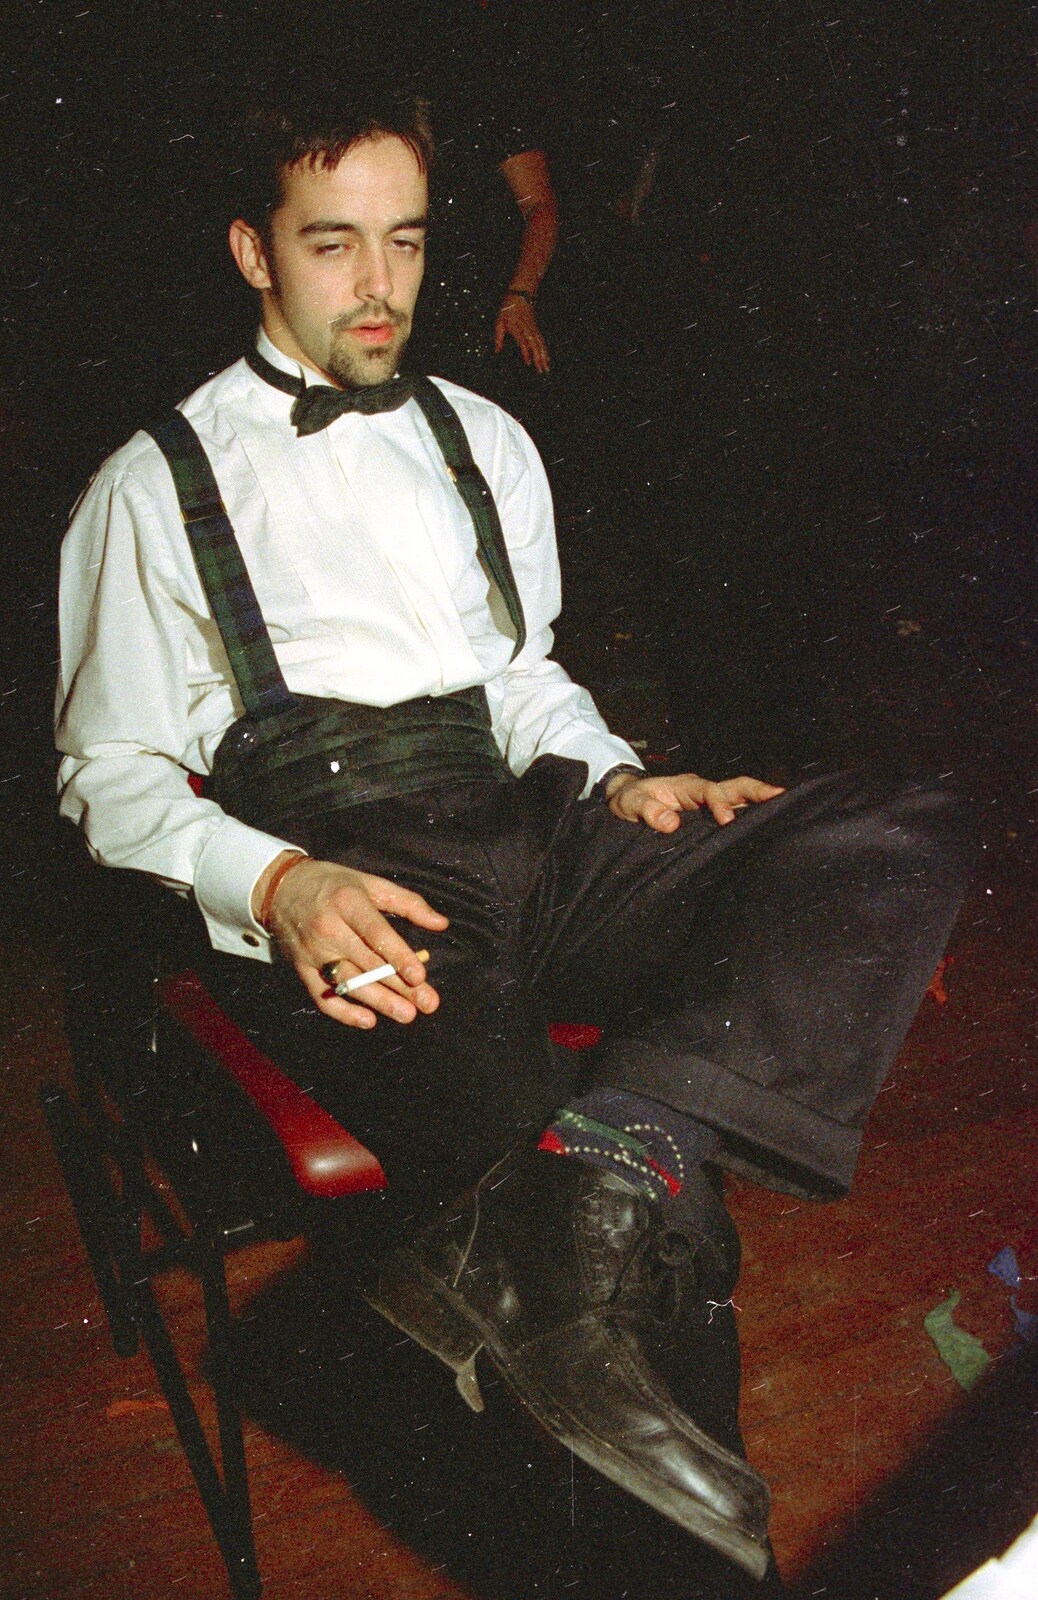 Trev looks a bit wasted from CISU at the Suffolk College May Ball, Ipswich, Suffolk - 11th May 1997